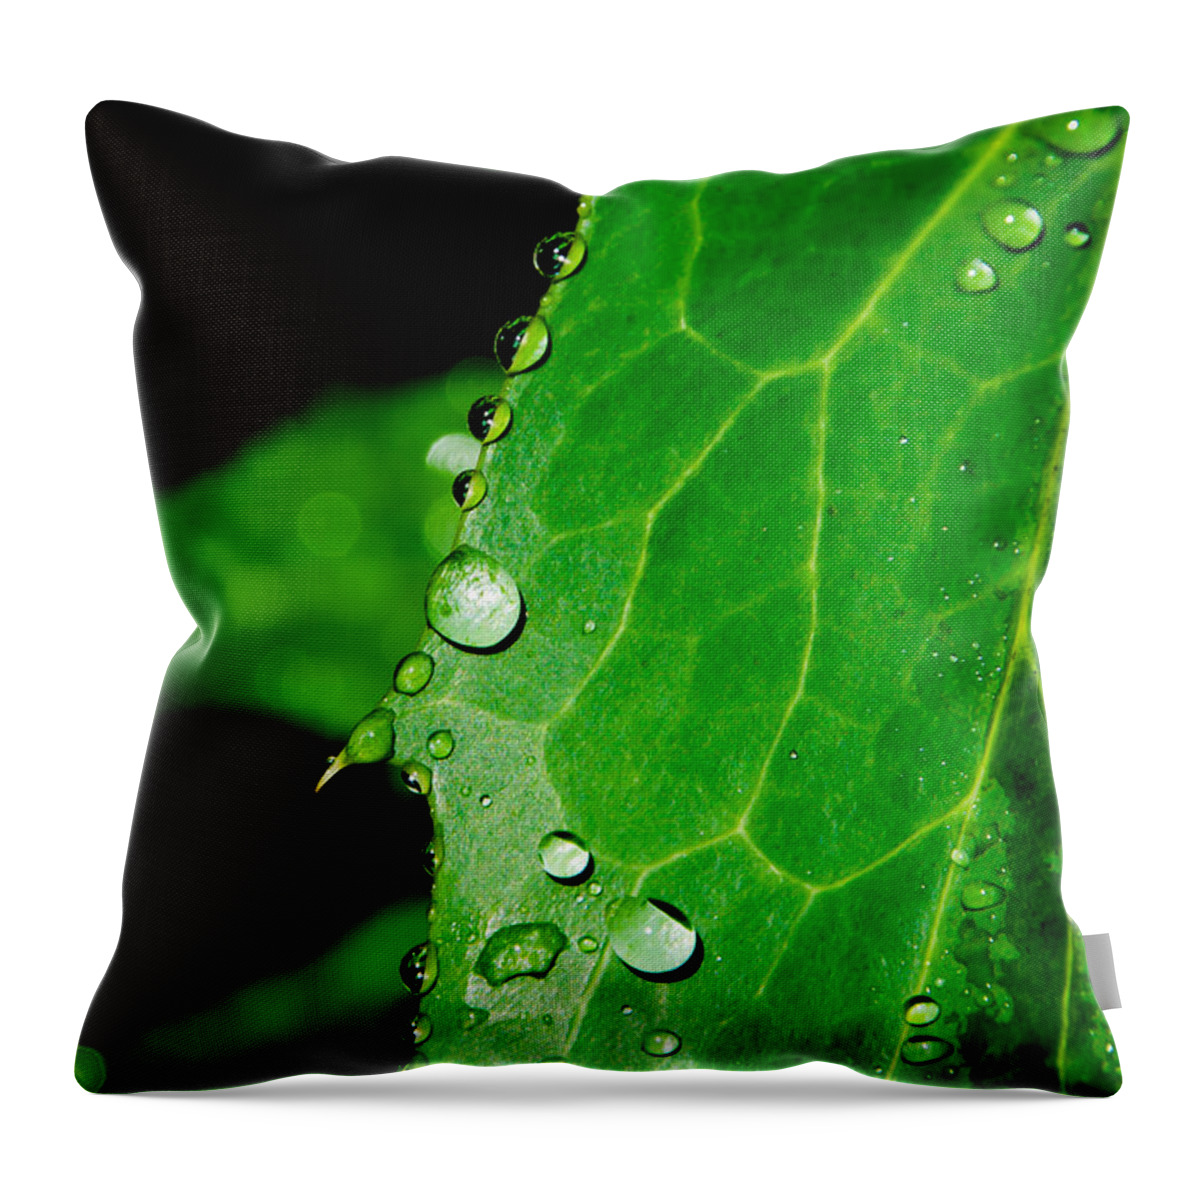 Raindrops Throw Pillow featuring the photograph Raindrops On Green Leaf by Andreas Berthold